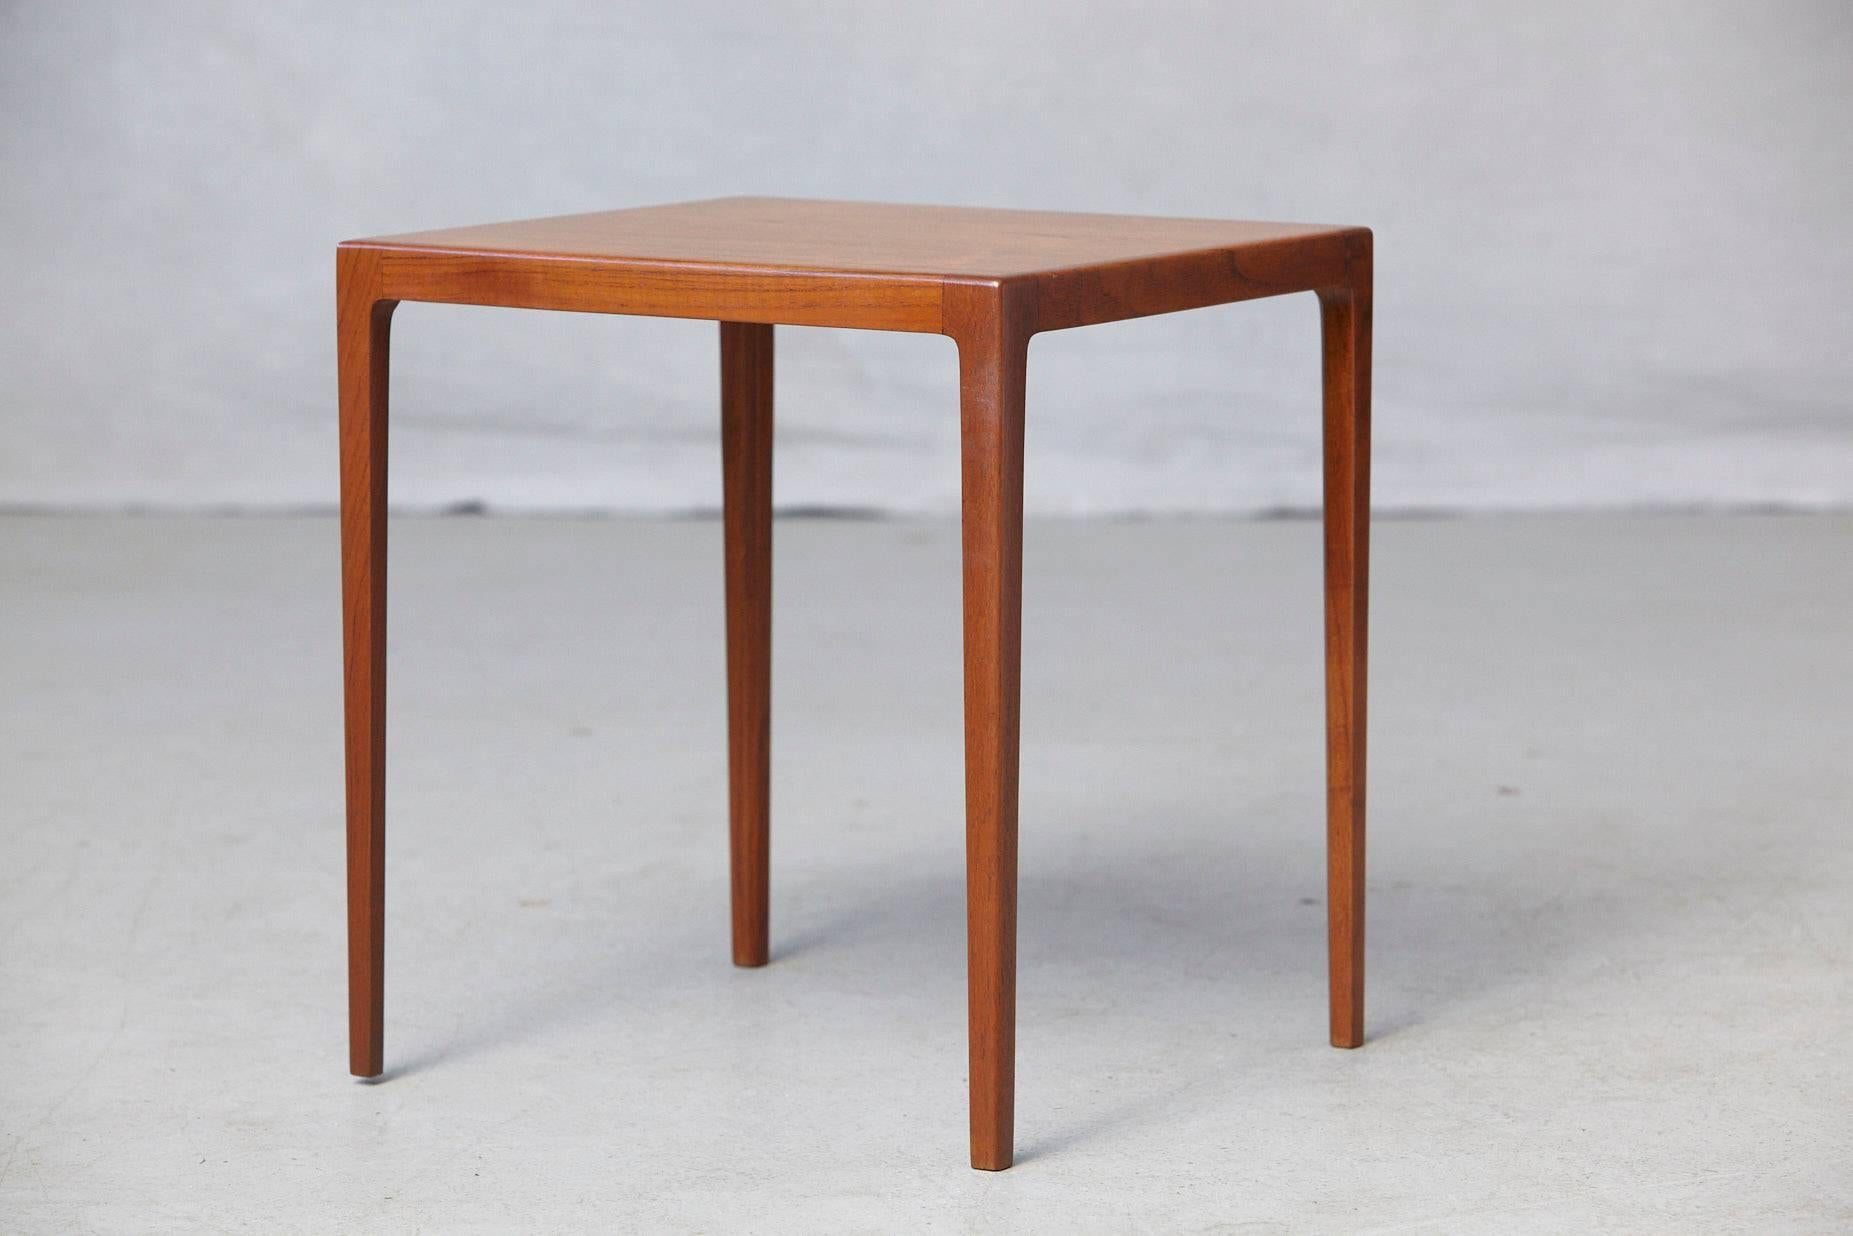 Lovely midcentury Danish solid teak side table by Ludvig Pontoppidan. Beautiful sleek design with long tapered legs which end smoothly into the corners of the table. The table has been completely newly refinished in November 2017 and has a very